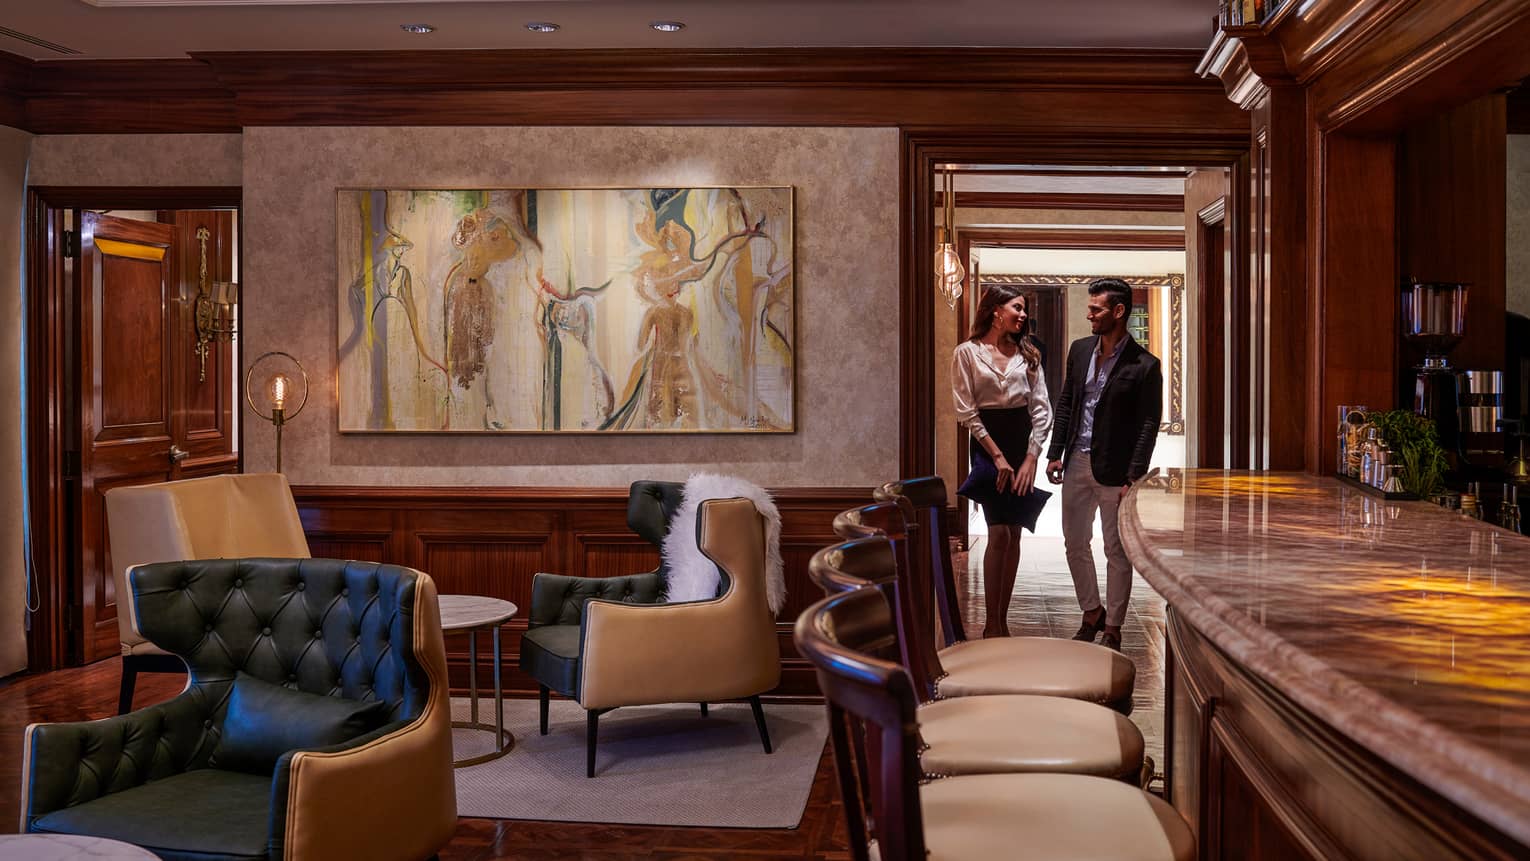 Woman and man walk through door into cocktail lounge with large painting, leather chairs